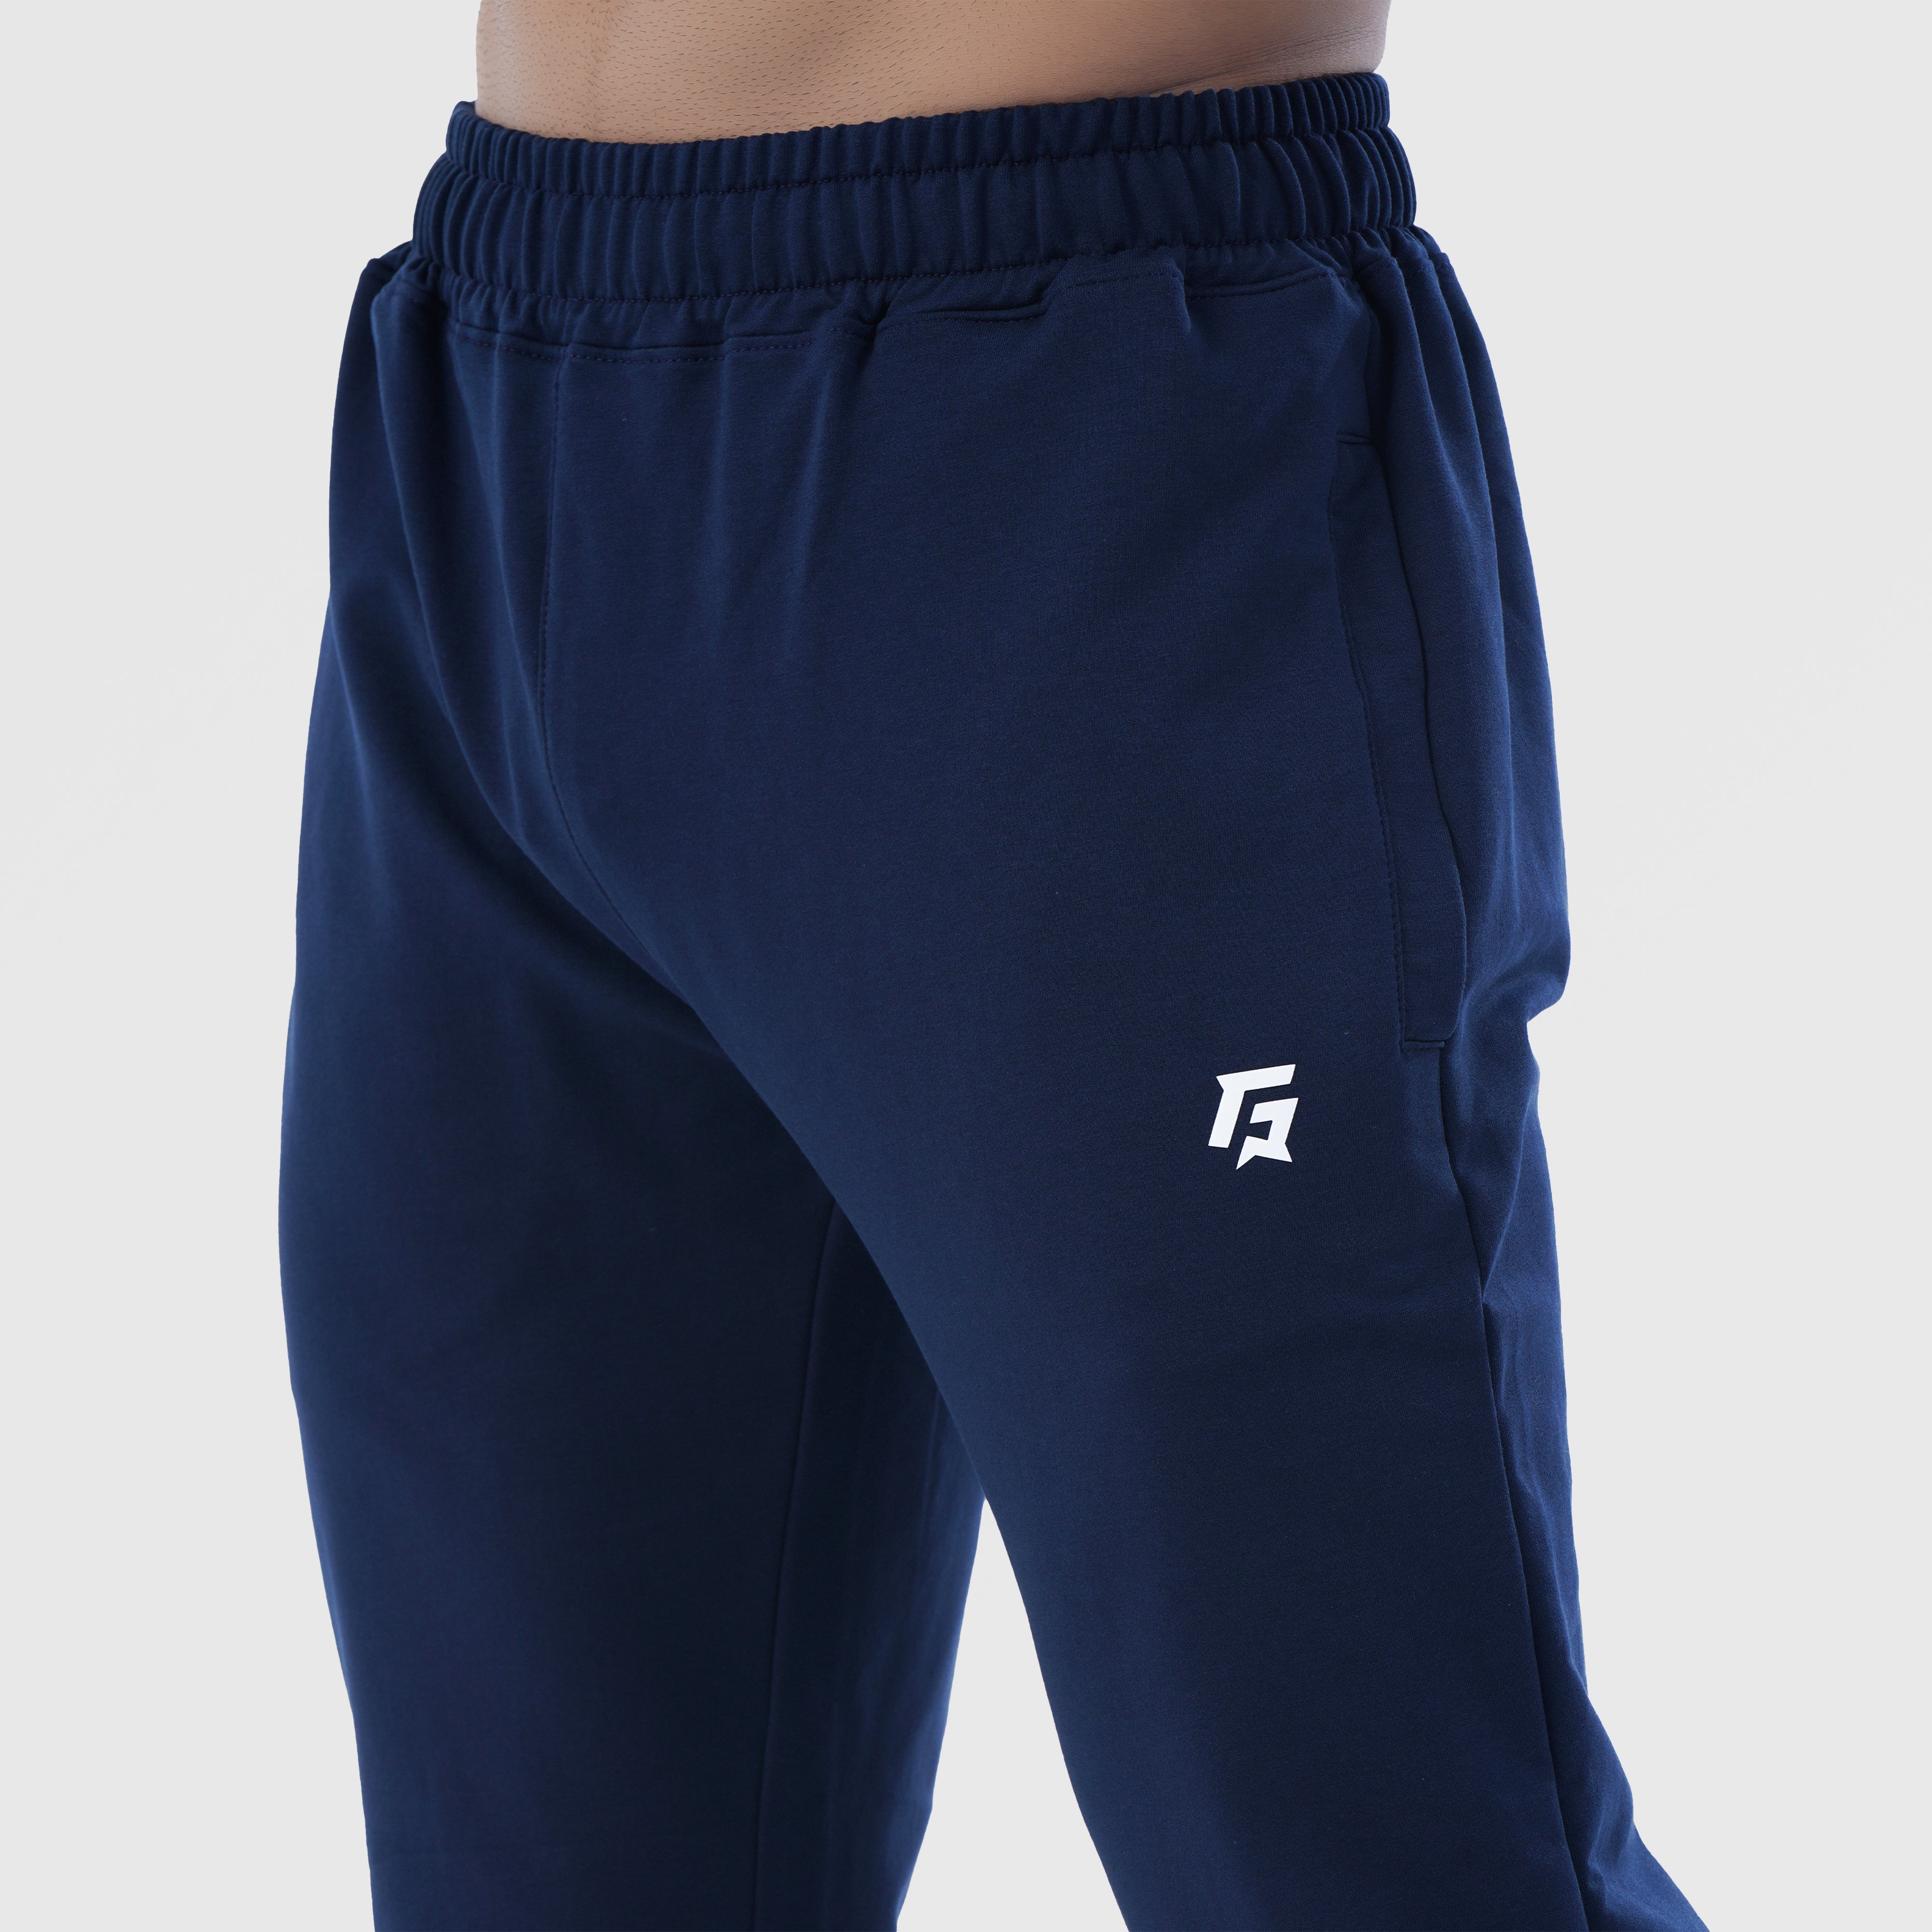 Ethno Trousers (Navy)